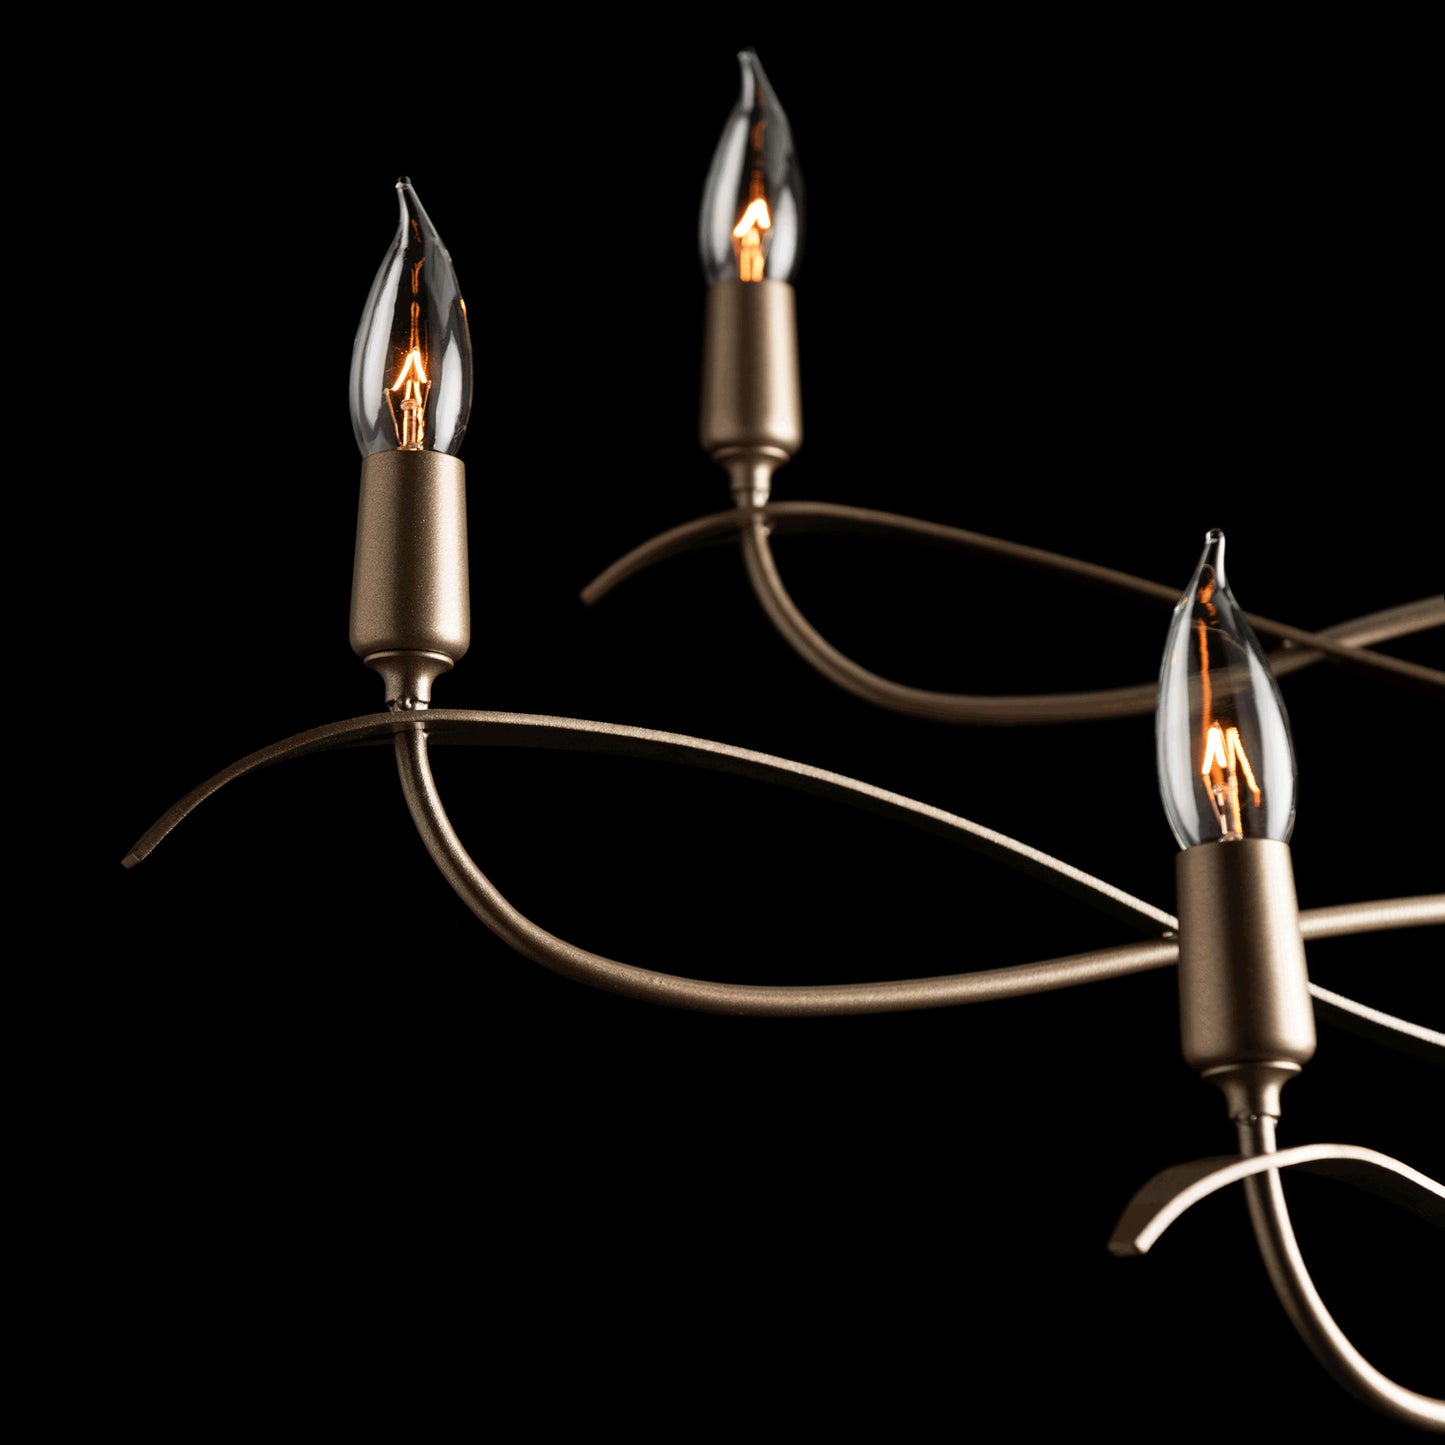 The Hubbardton Forge Willow 6-Light Small Chandelier features a modern design, and it is showcased on a sleek black background.